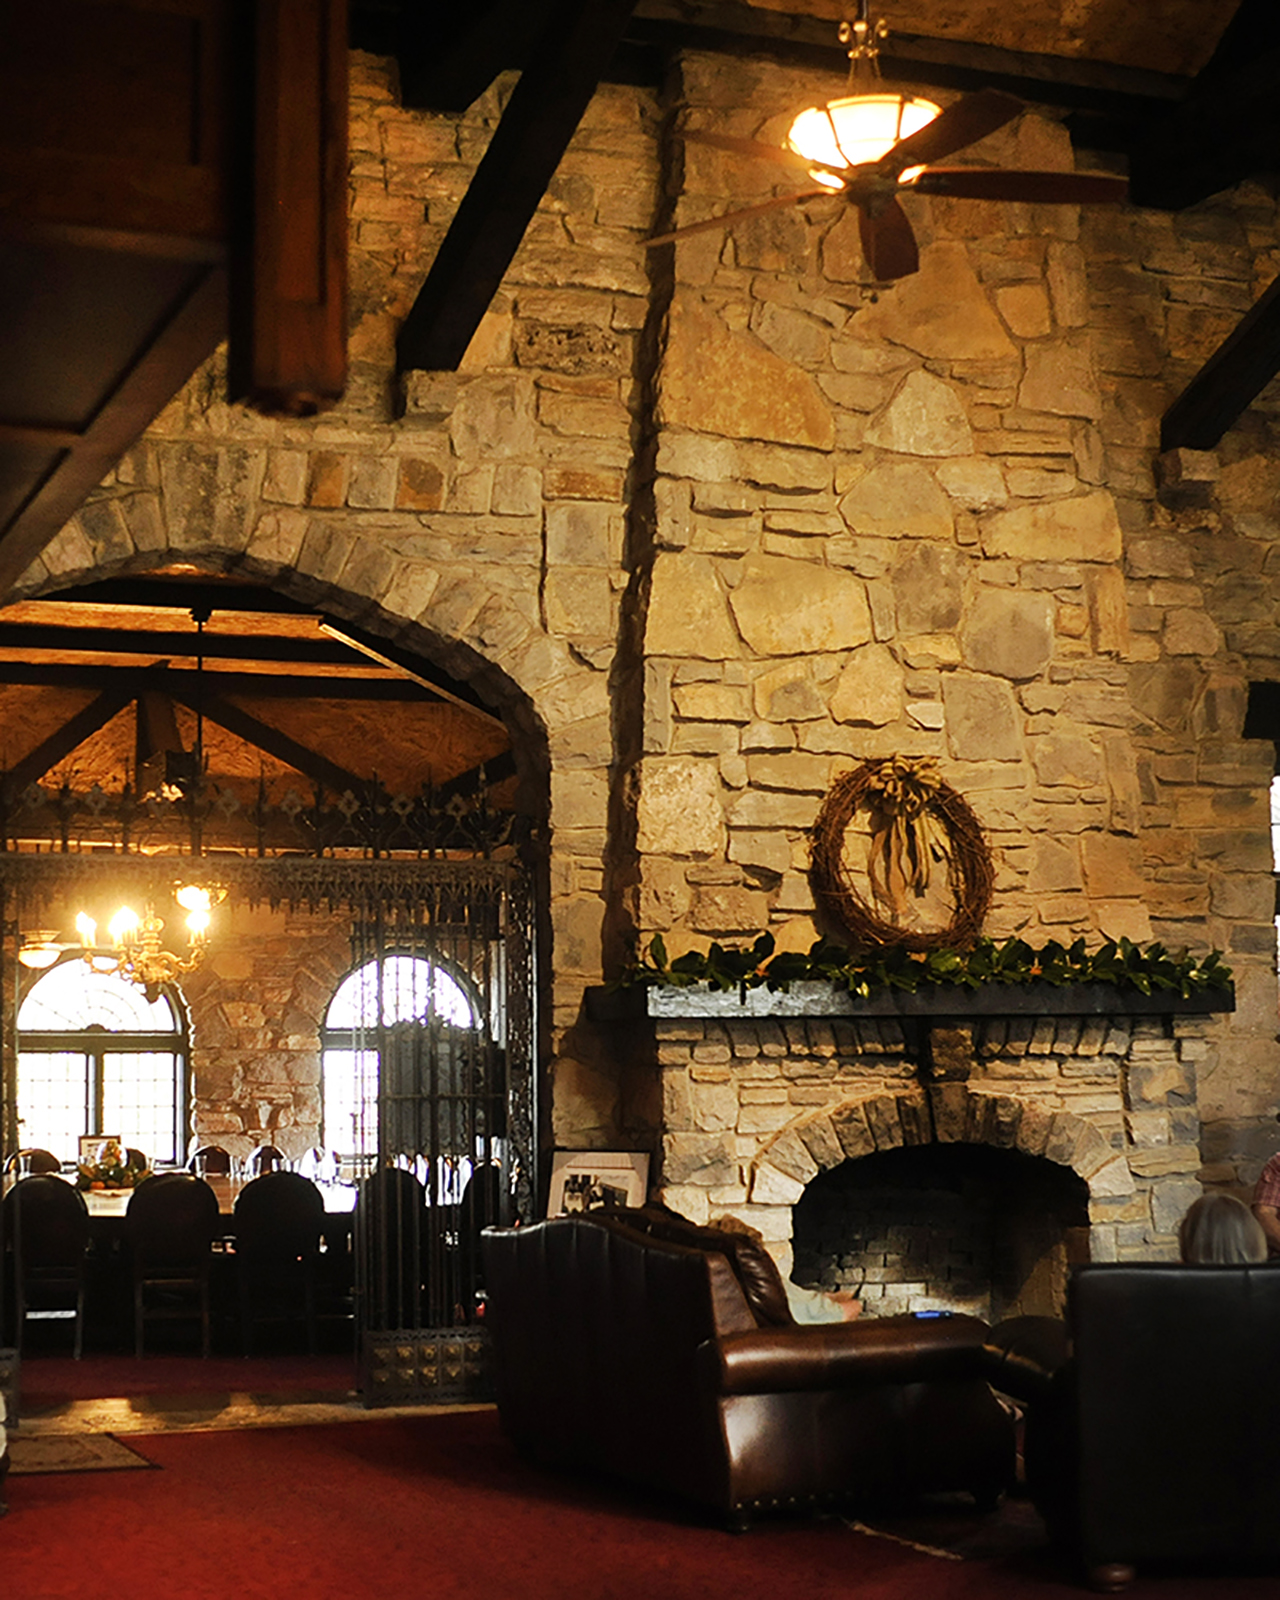 Inside the main room of the Milky Way manor house with a stone chimney and fireplace, with a view of the huge dining room and table in the background on the left.